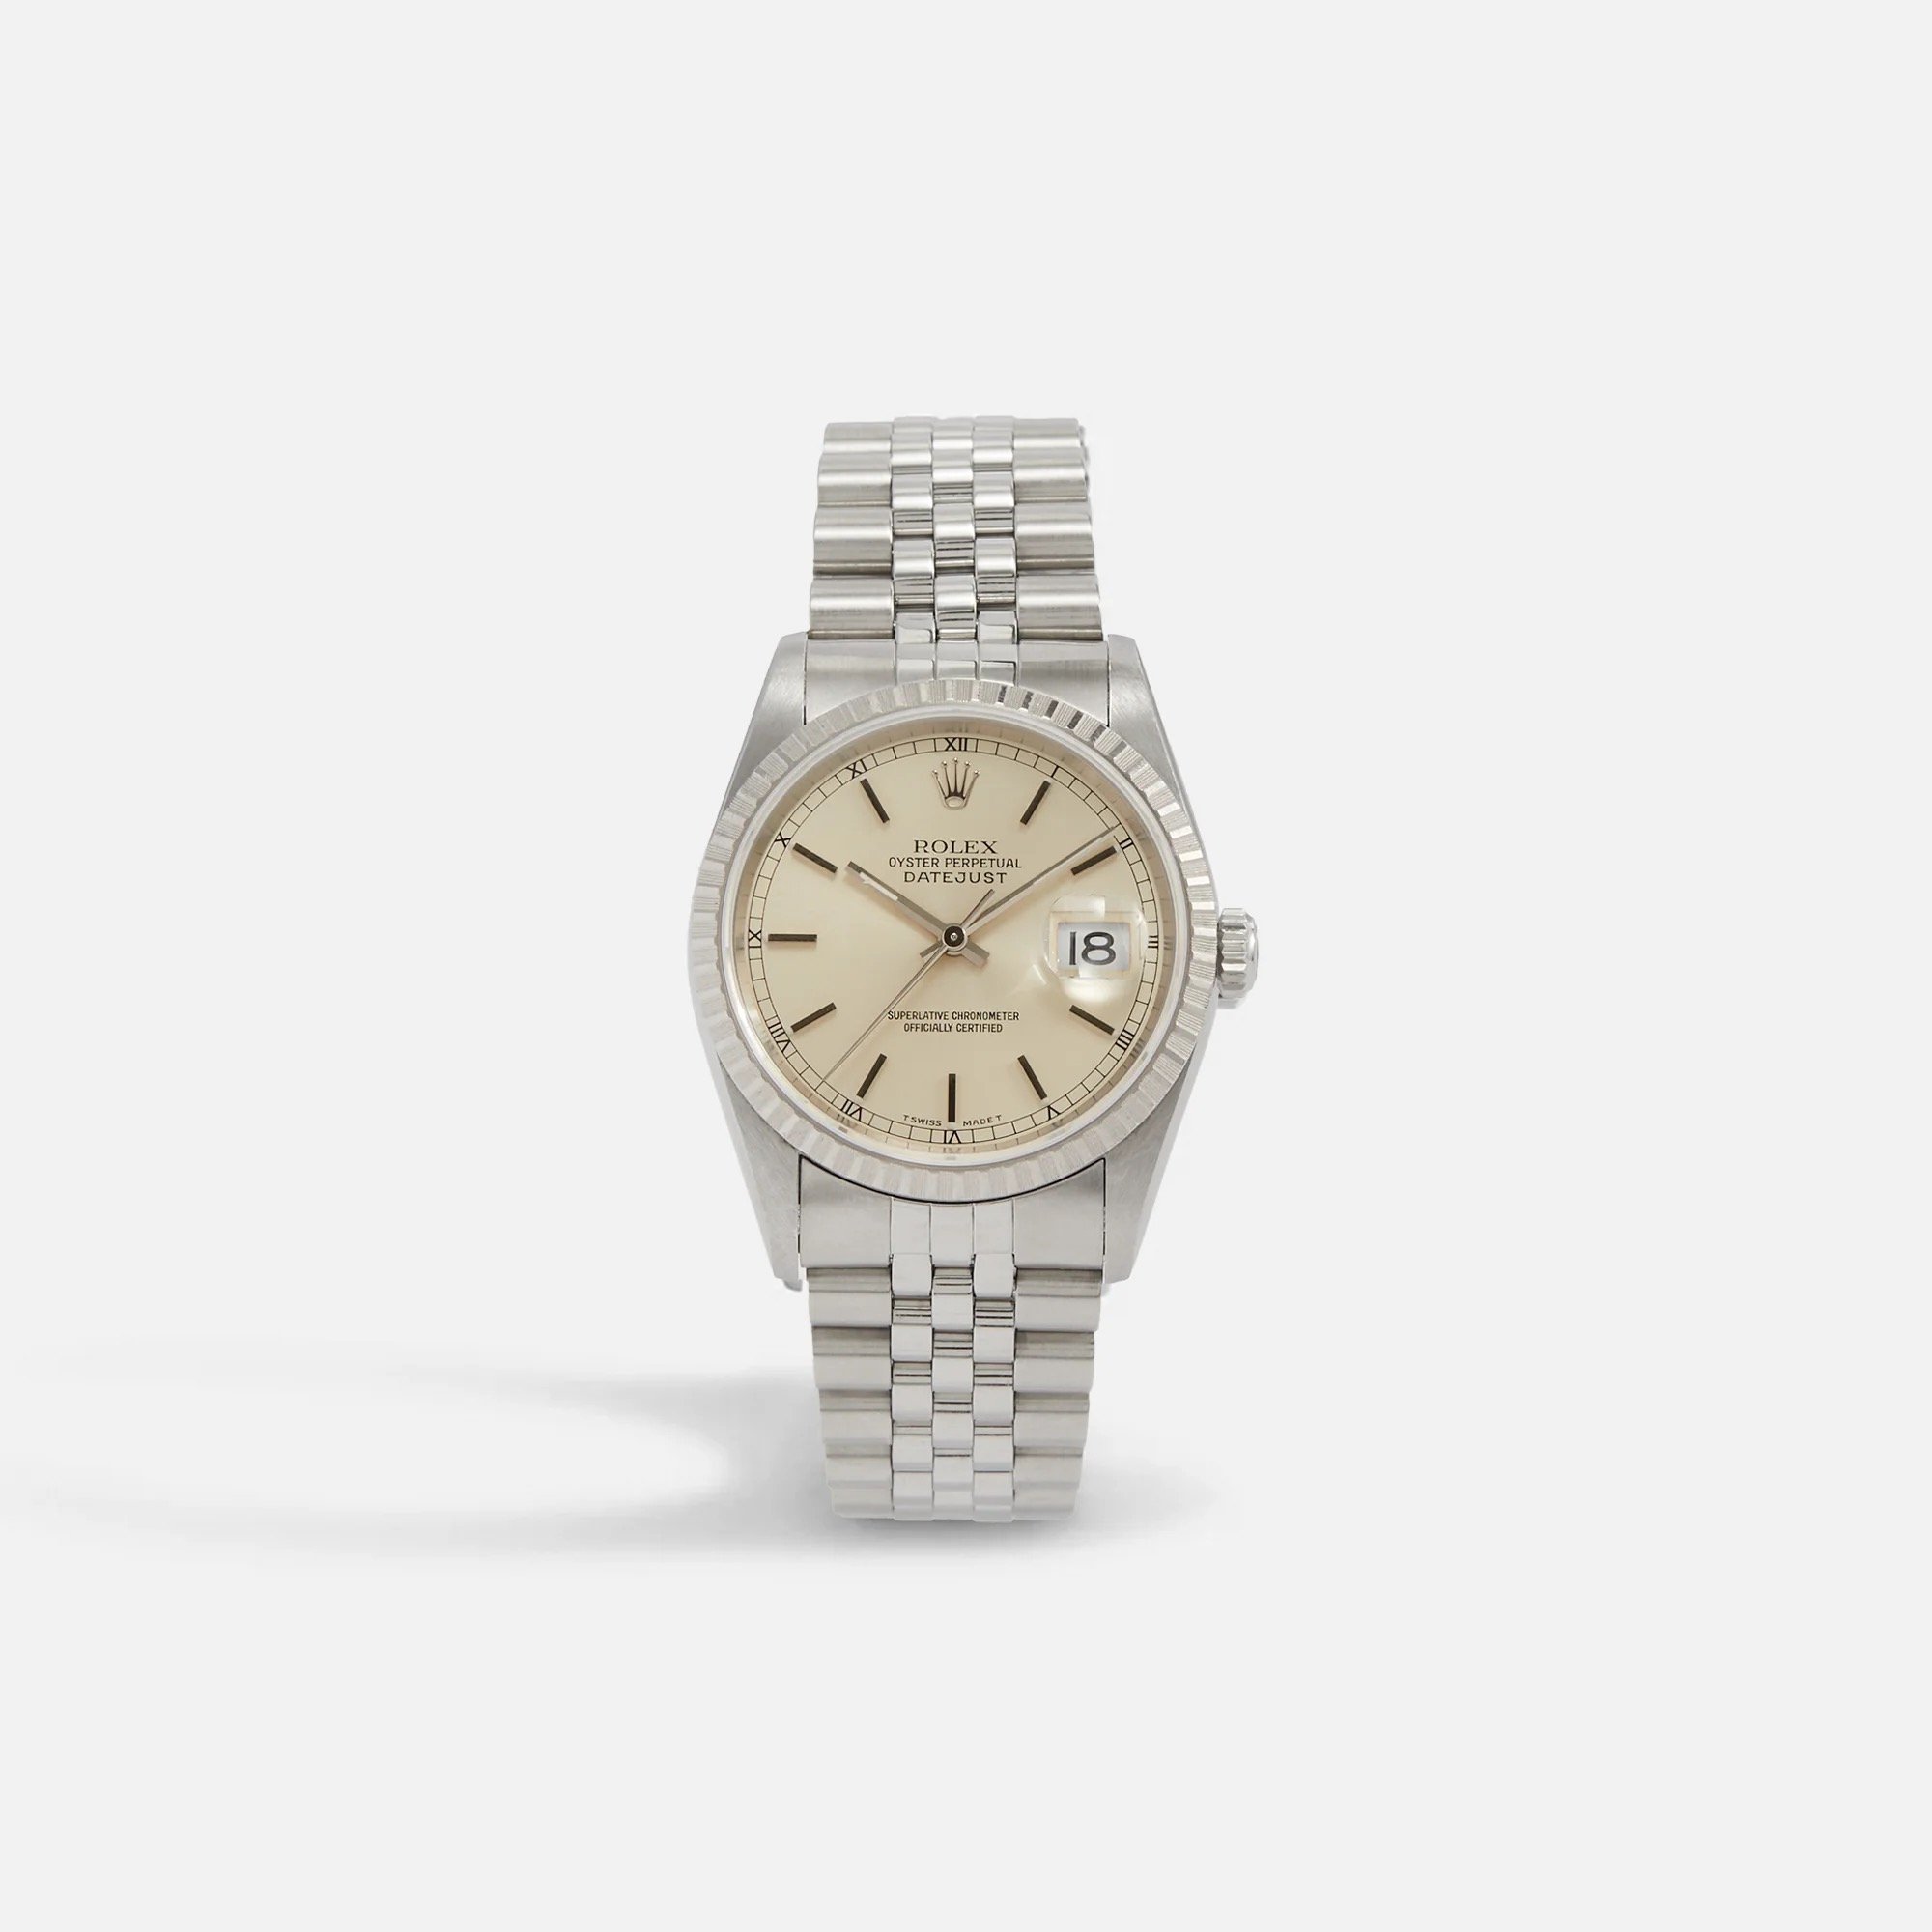 Rolex Datejust Reference 16220 Unpolished